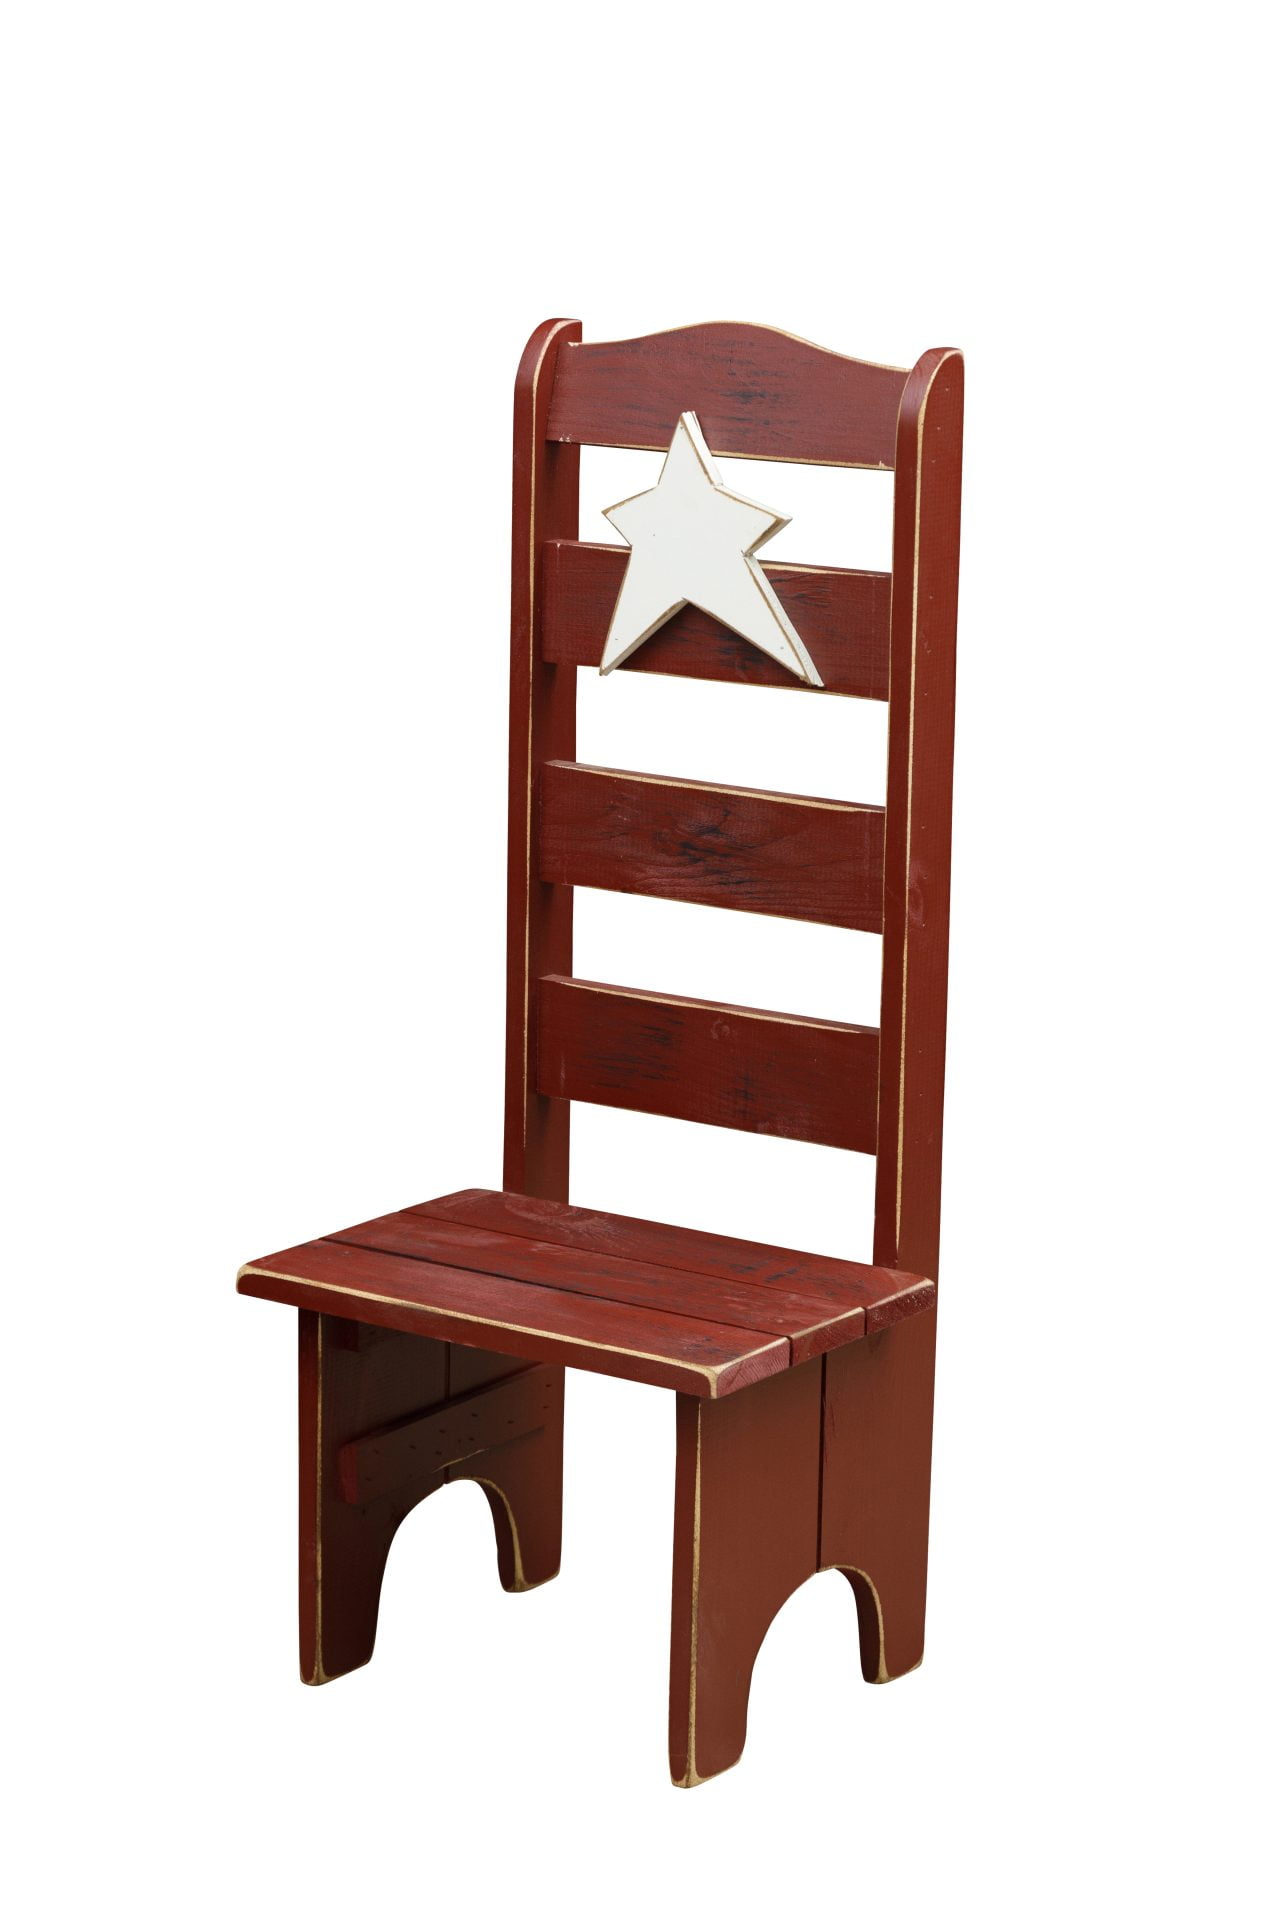 Primitive Pine Chair with Rustic Star Cut Out